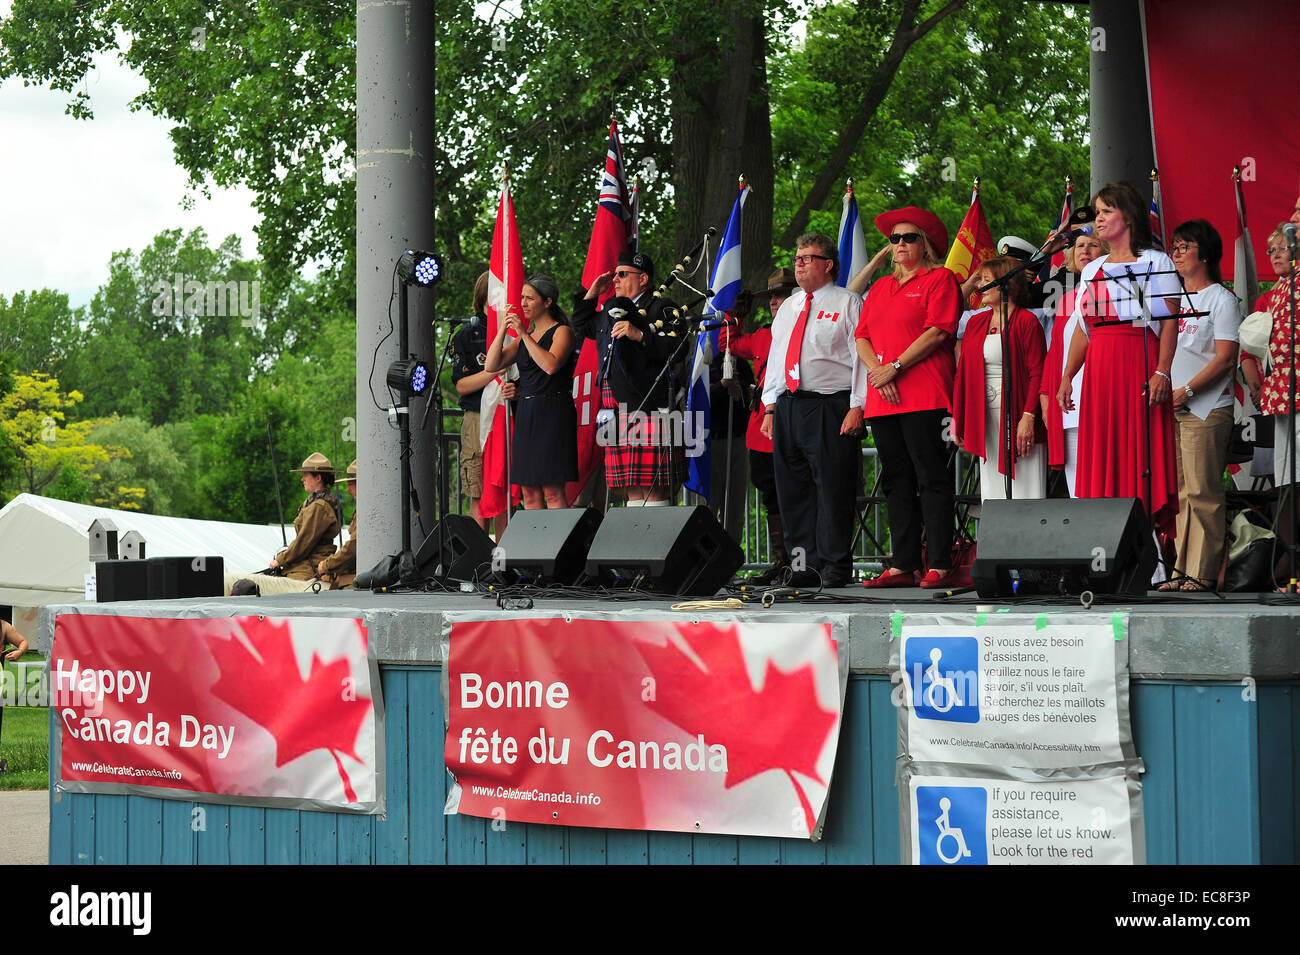 People stand for the Canadian National Anthem on a Canada Day event held in London, Ontario. Stock Photo